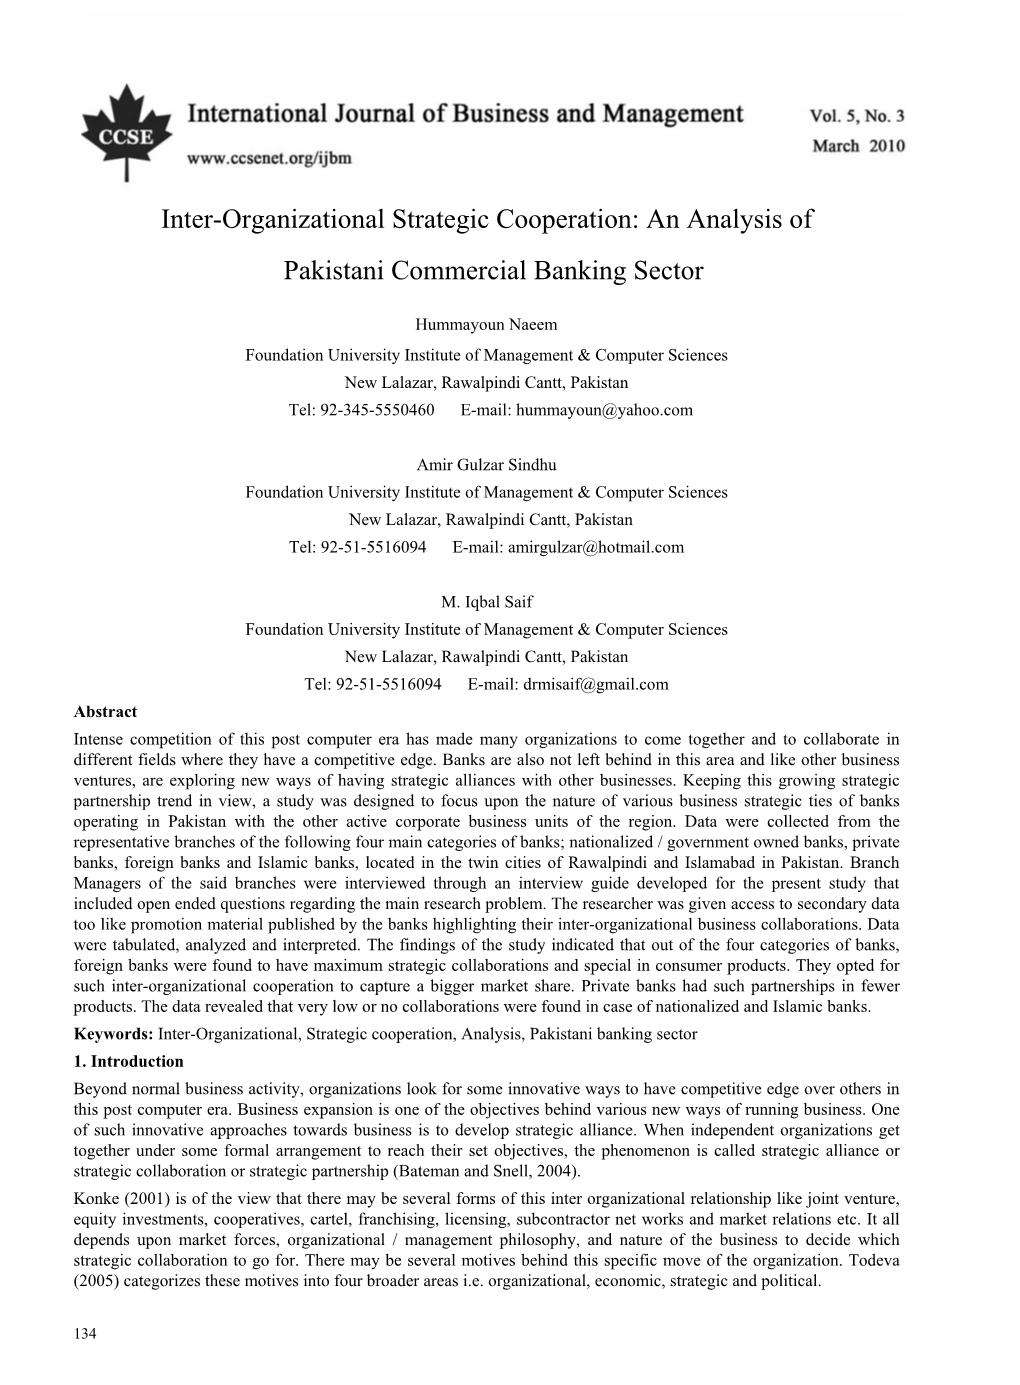 Inter-Organizational Strategic Cooperation: an Analysis of Pakistani Commercial Banking Sector